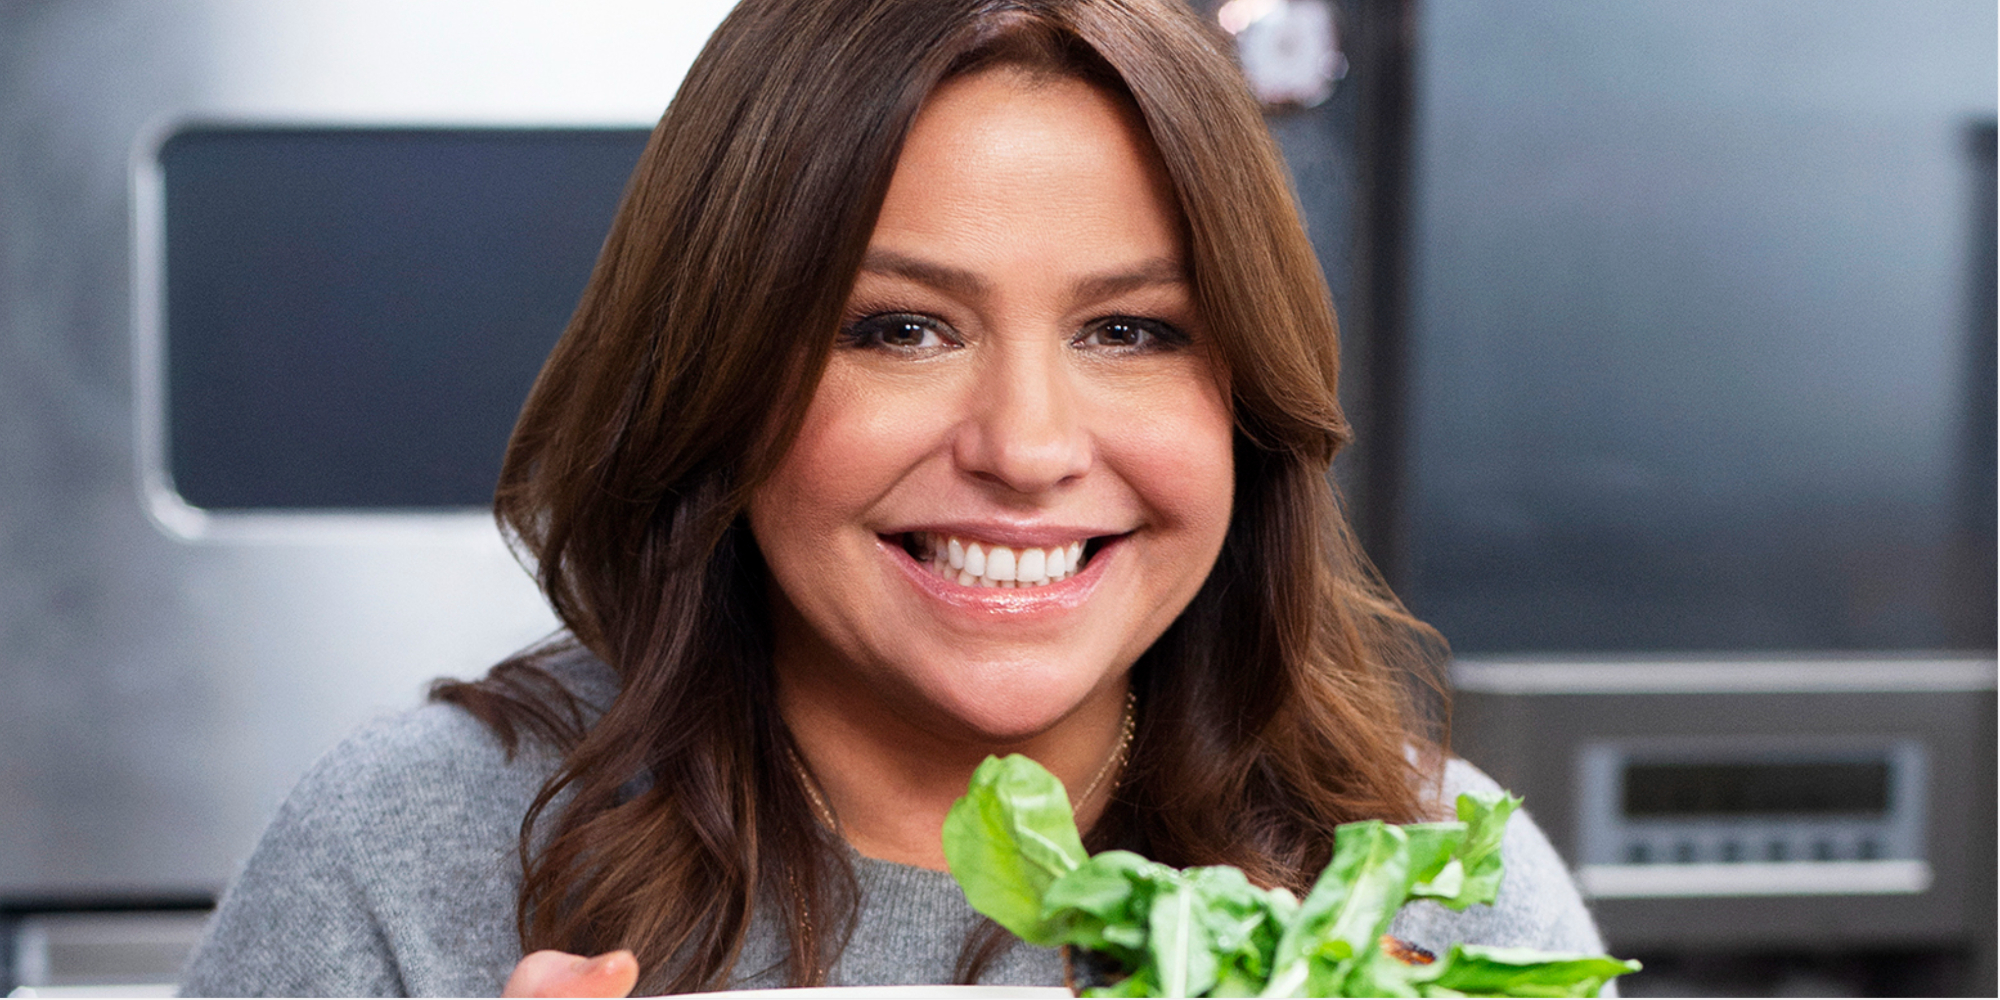 Celebrity chef Rachael Ray on the set of her Food Network series.